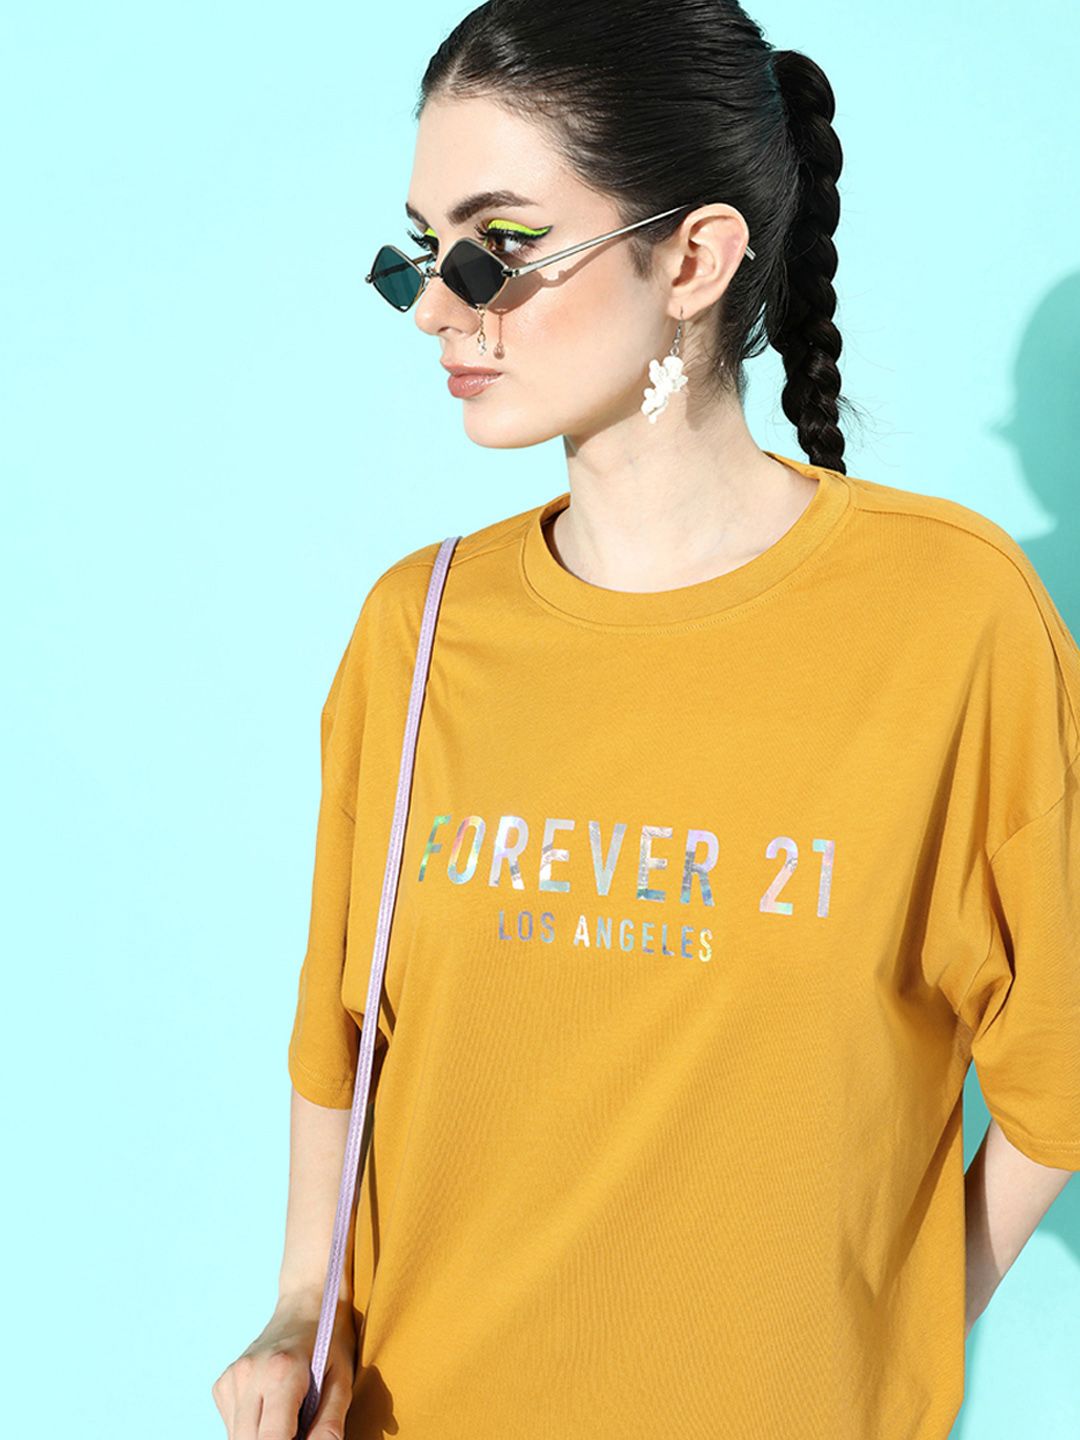 FOREVER 21 Women Brand Logo Printed Drop-Shoulder Sleeves Pure Cotton T-shirt Price in India